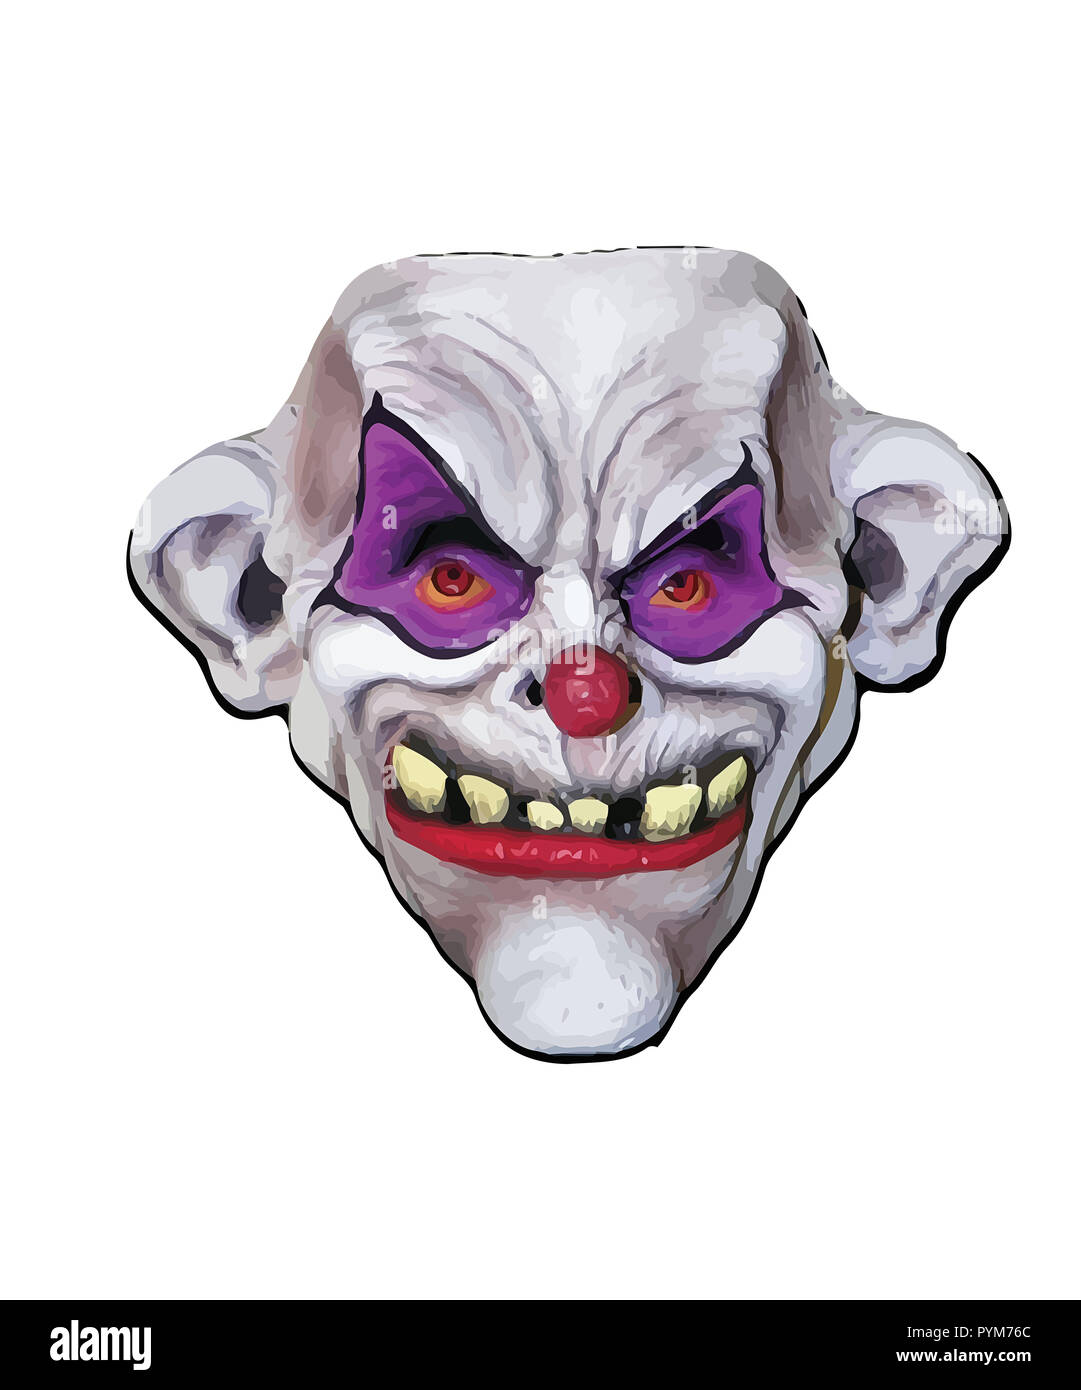 terror clown evil scary expressio teeth out illustration Stock Photo